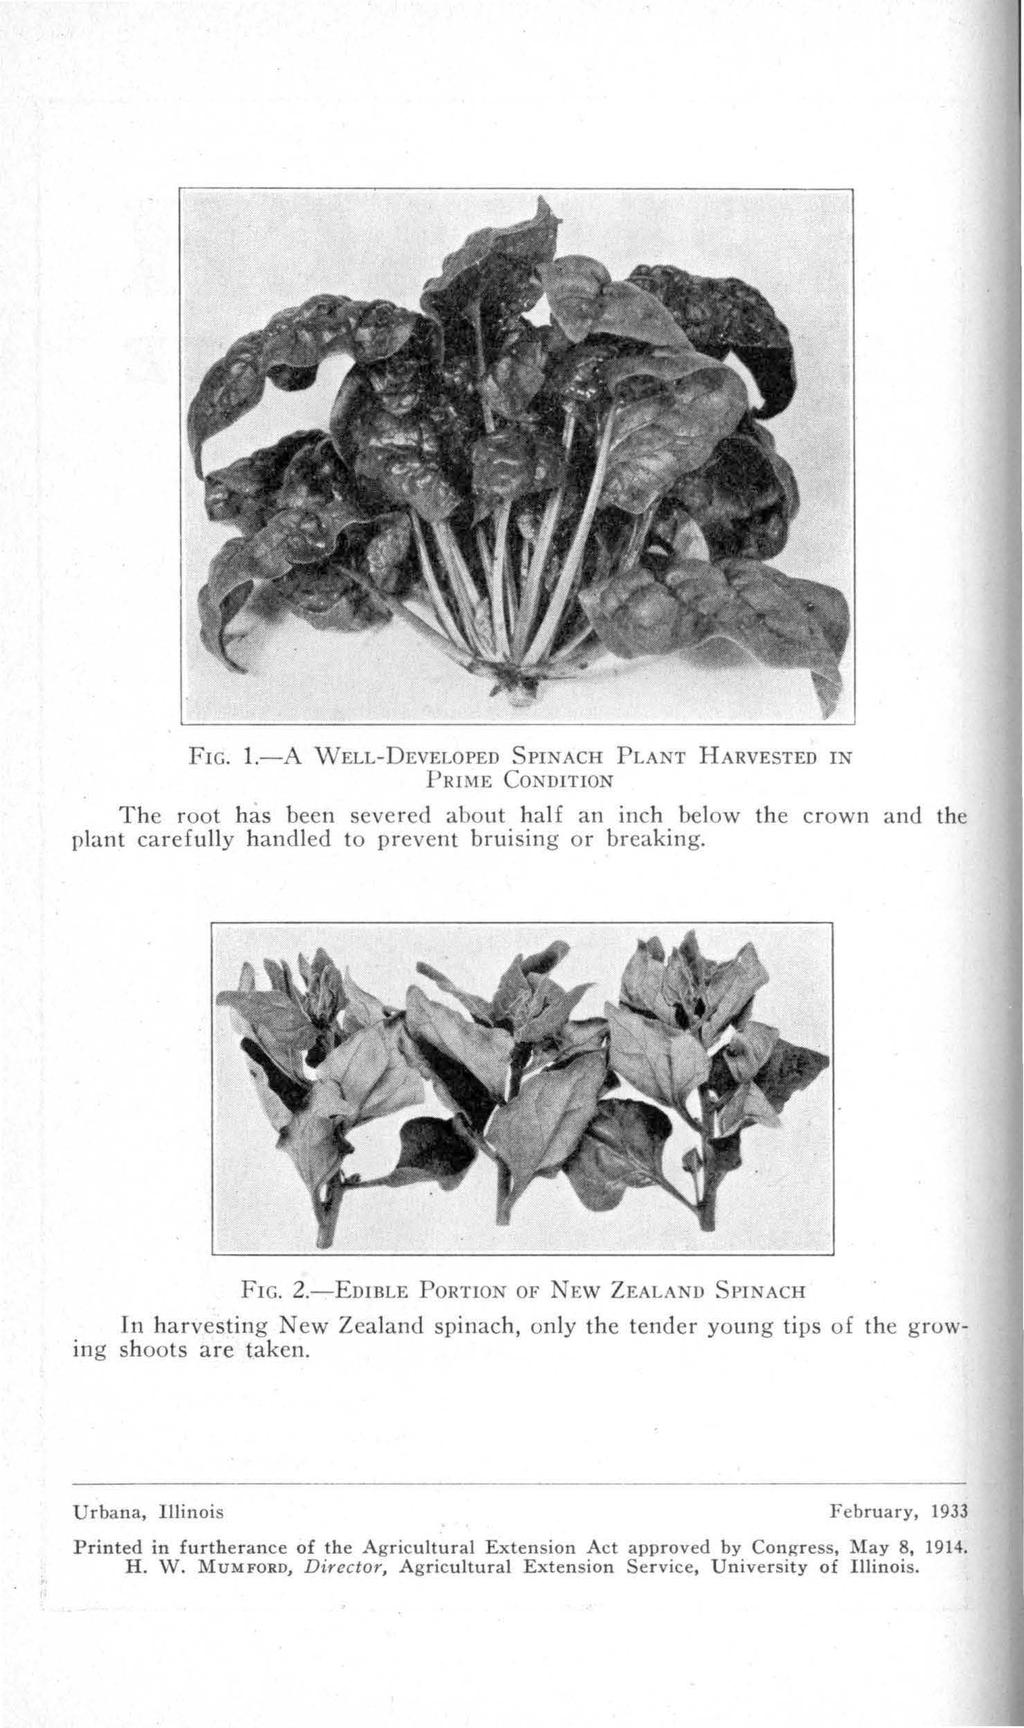 FIG. 1.-A WELL-DEVELOPED SPINACH PLANT HARVESTED IN PRIME CONDITION The root has been severed about half an inch below the crown and the plant carefully handled to prevent bruising or breaking. FIG.